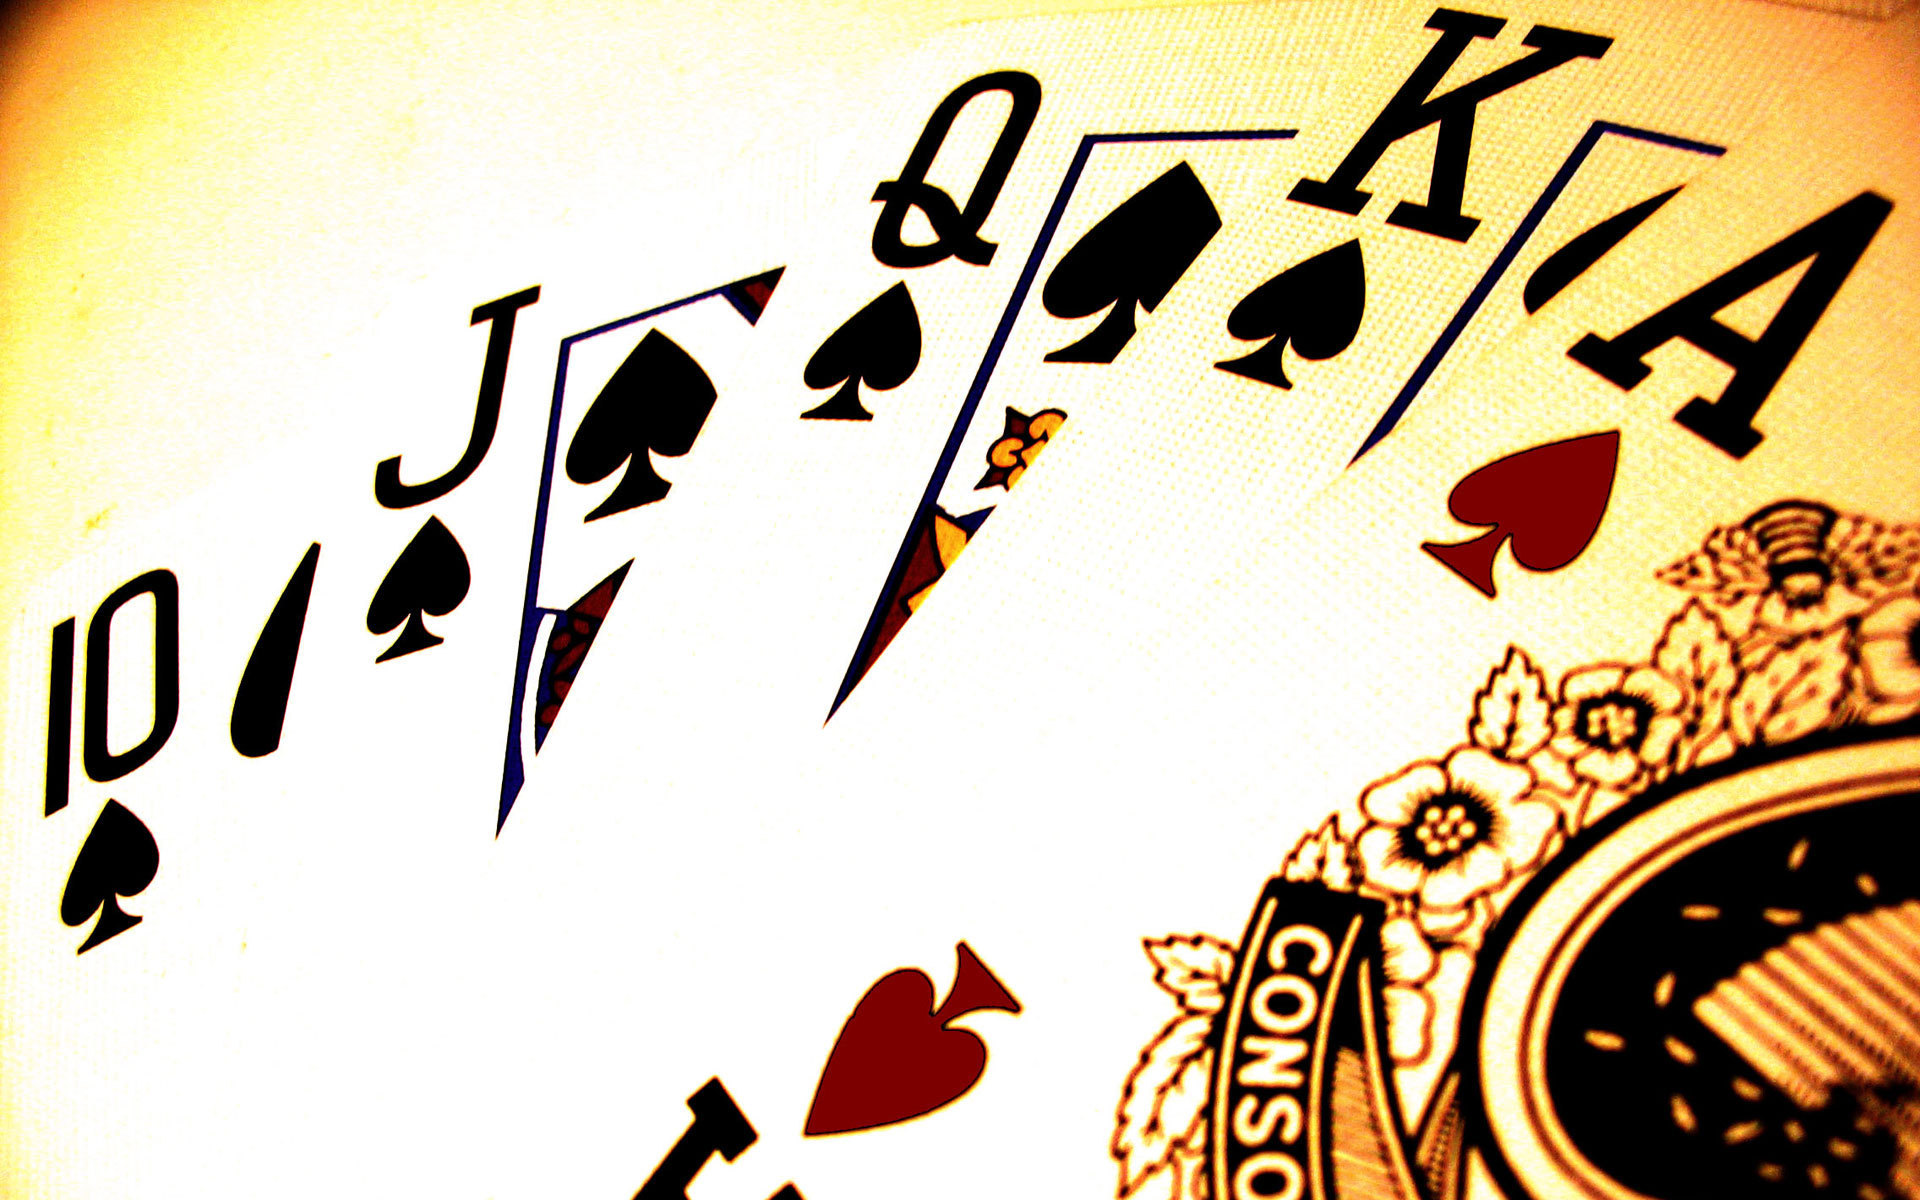 High Resolution Poker Cards Wallpaper HD 15 Game Full Size